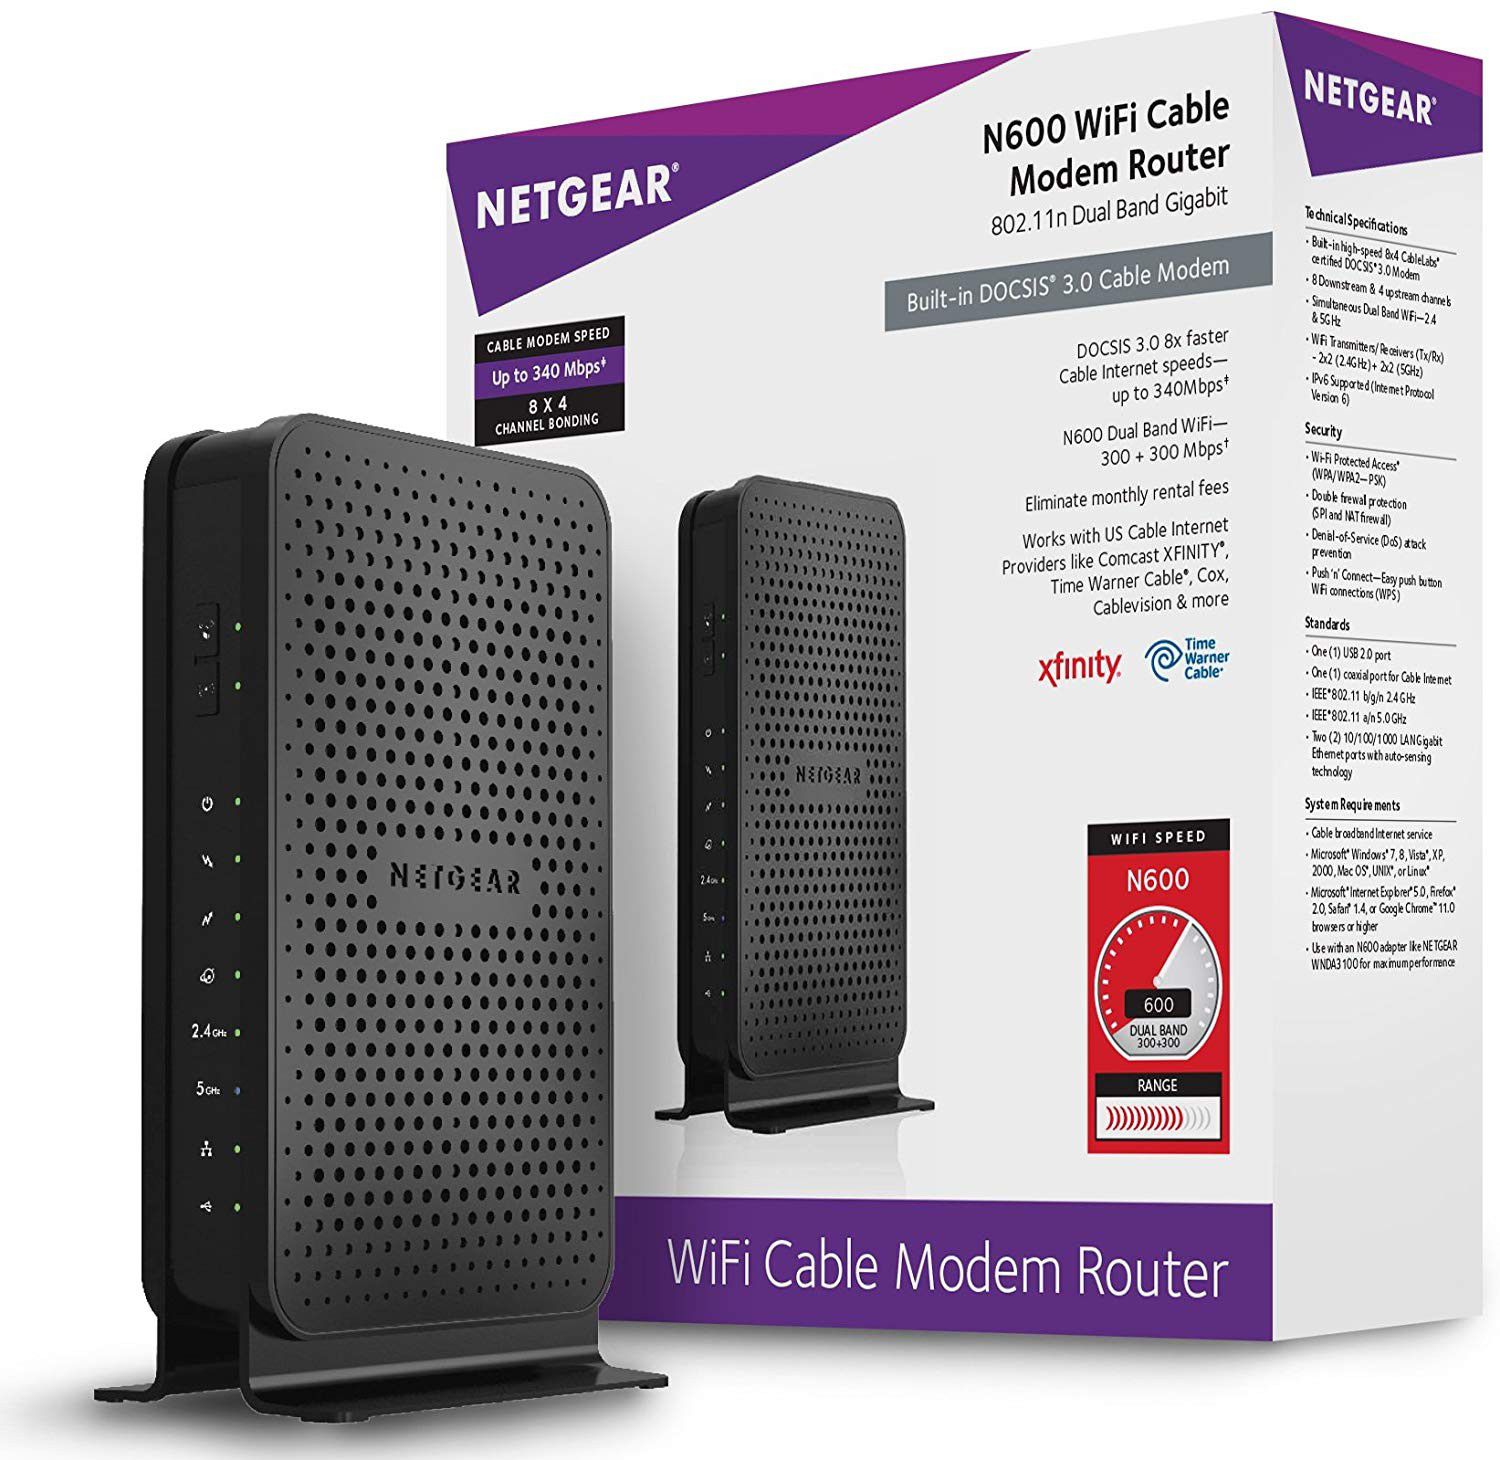 2-in-1 WiFi Cable Modem Router, approved for Xfinity